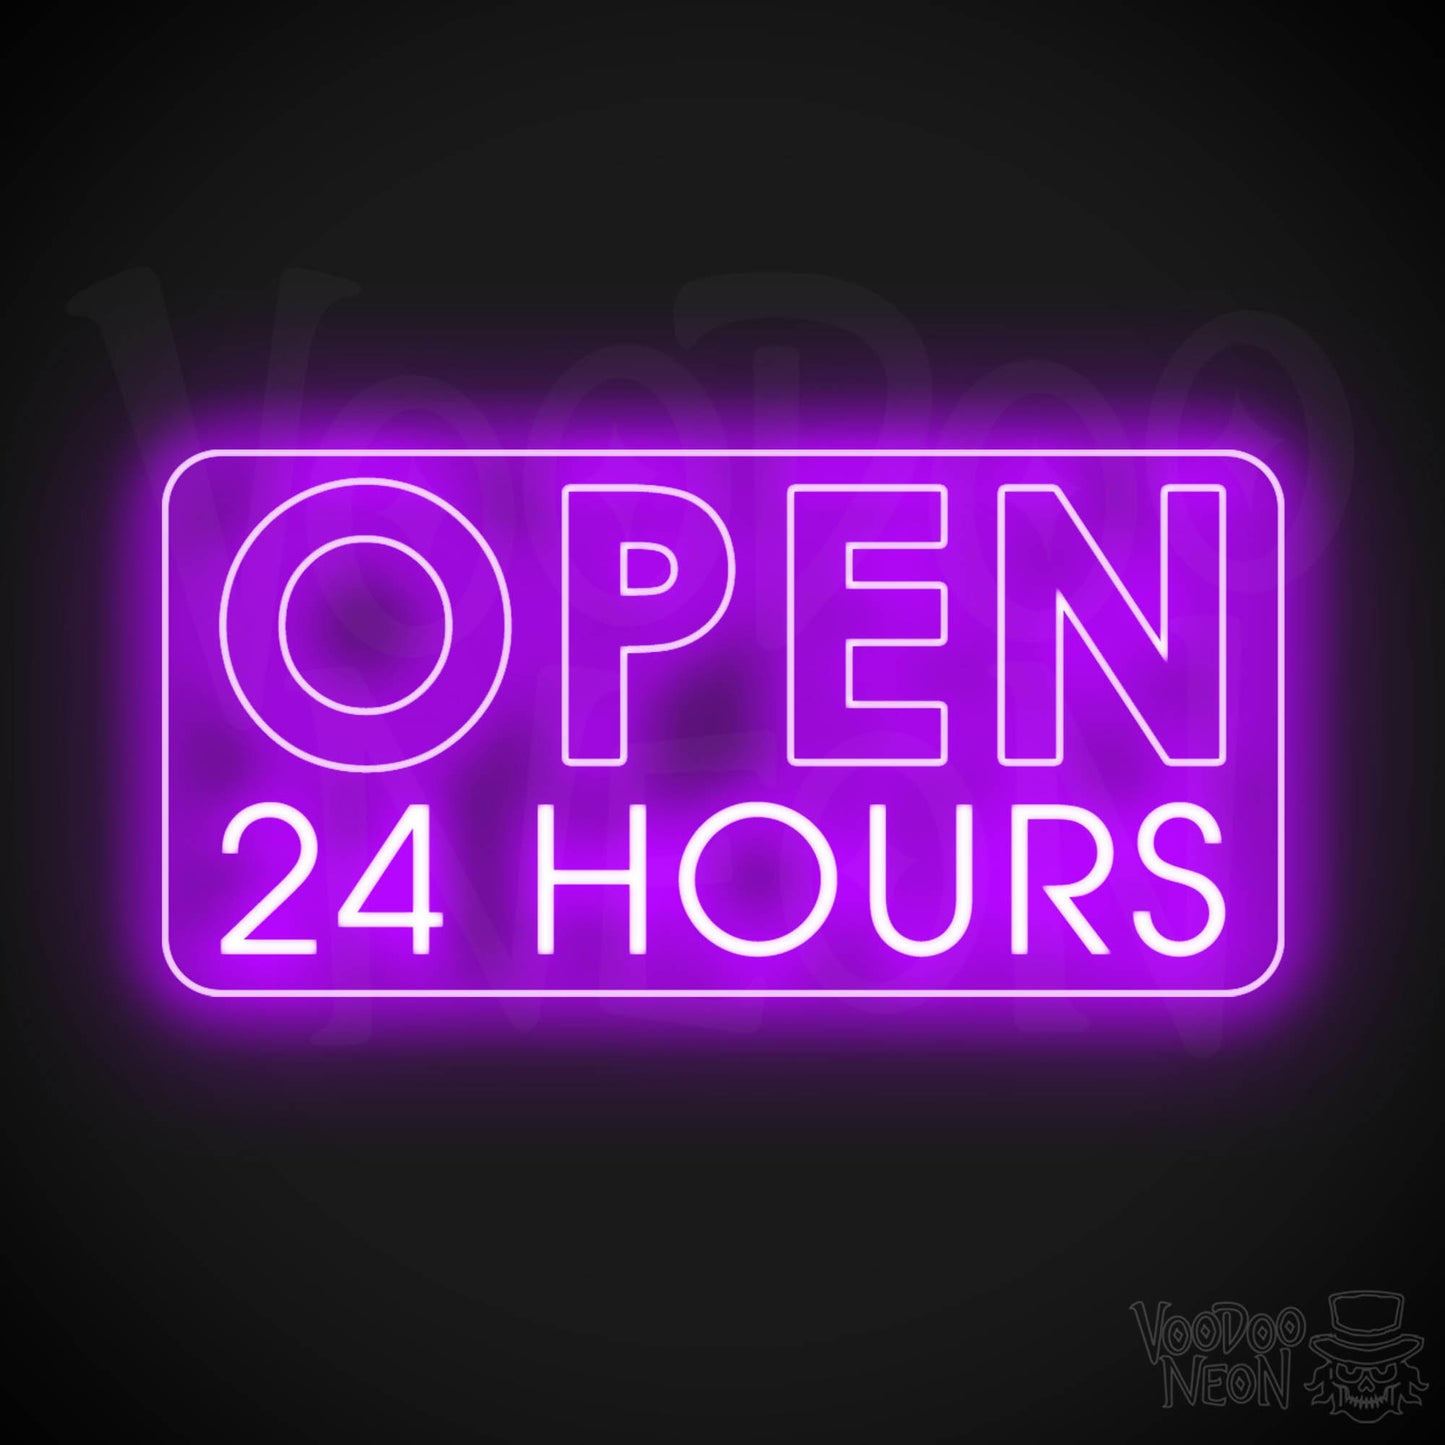 Open 24 Hours Neon Sign - Neon Open 24 Hours Sign - Shop Signs - Color Purple